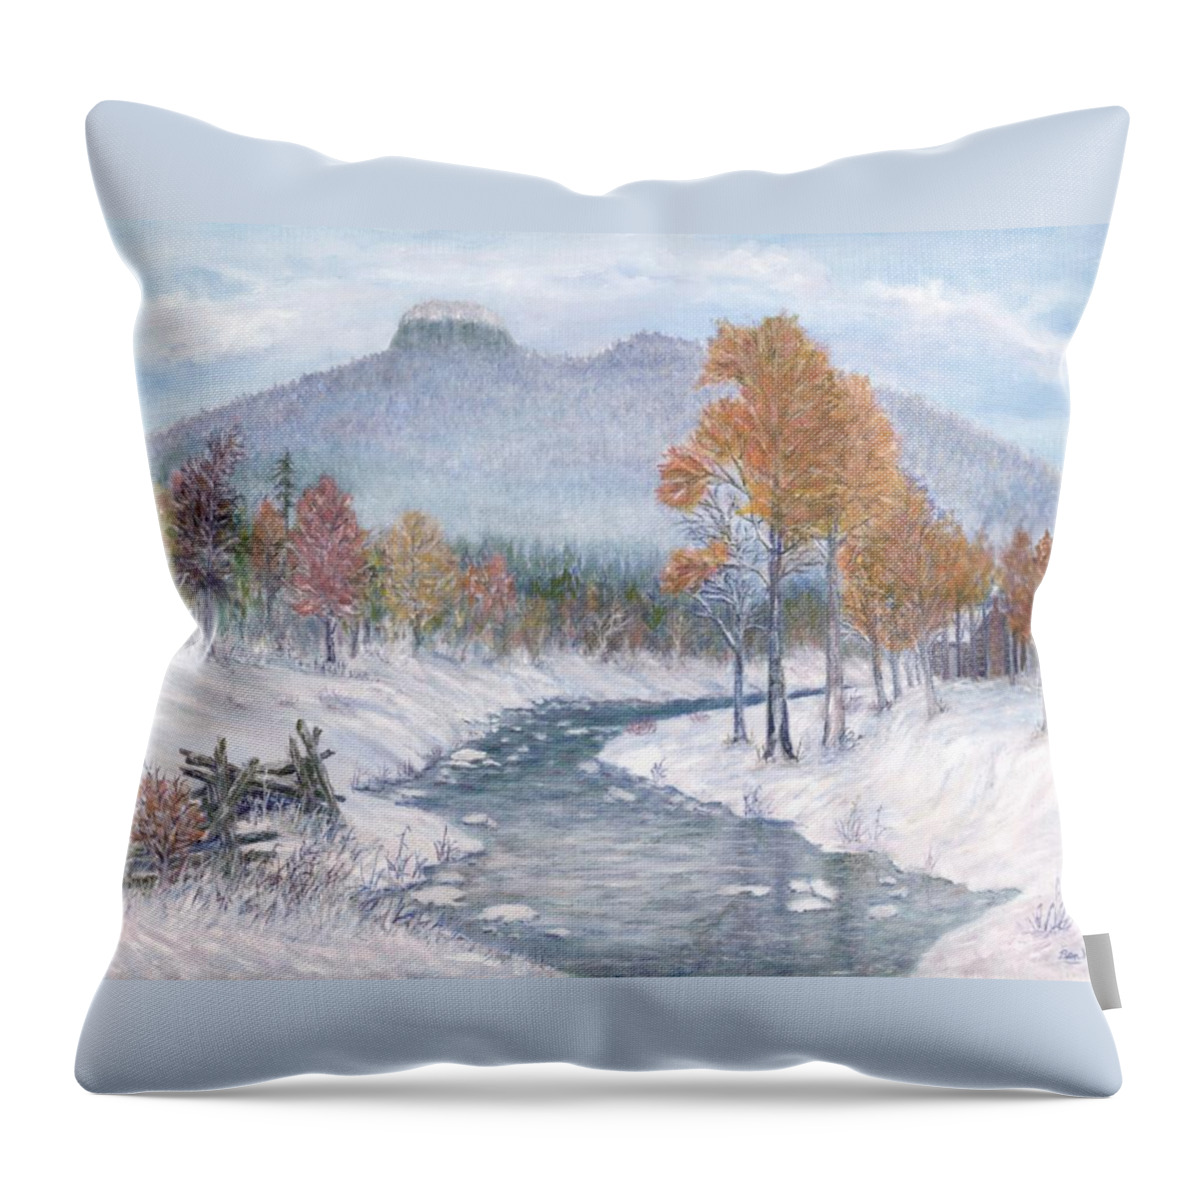 Snow Throw Pillow featuring the painting Autumn Snow by Ben Kiger